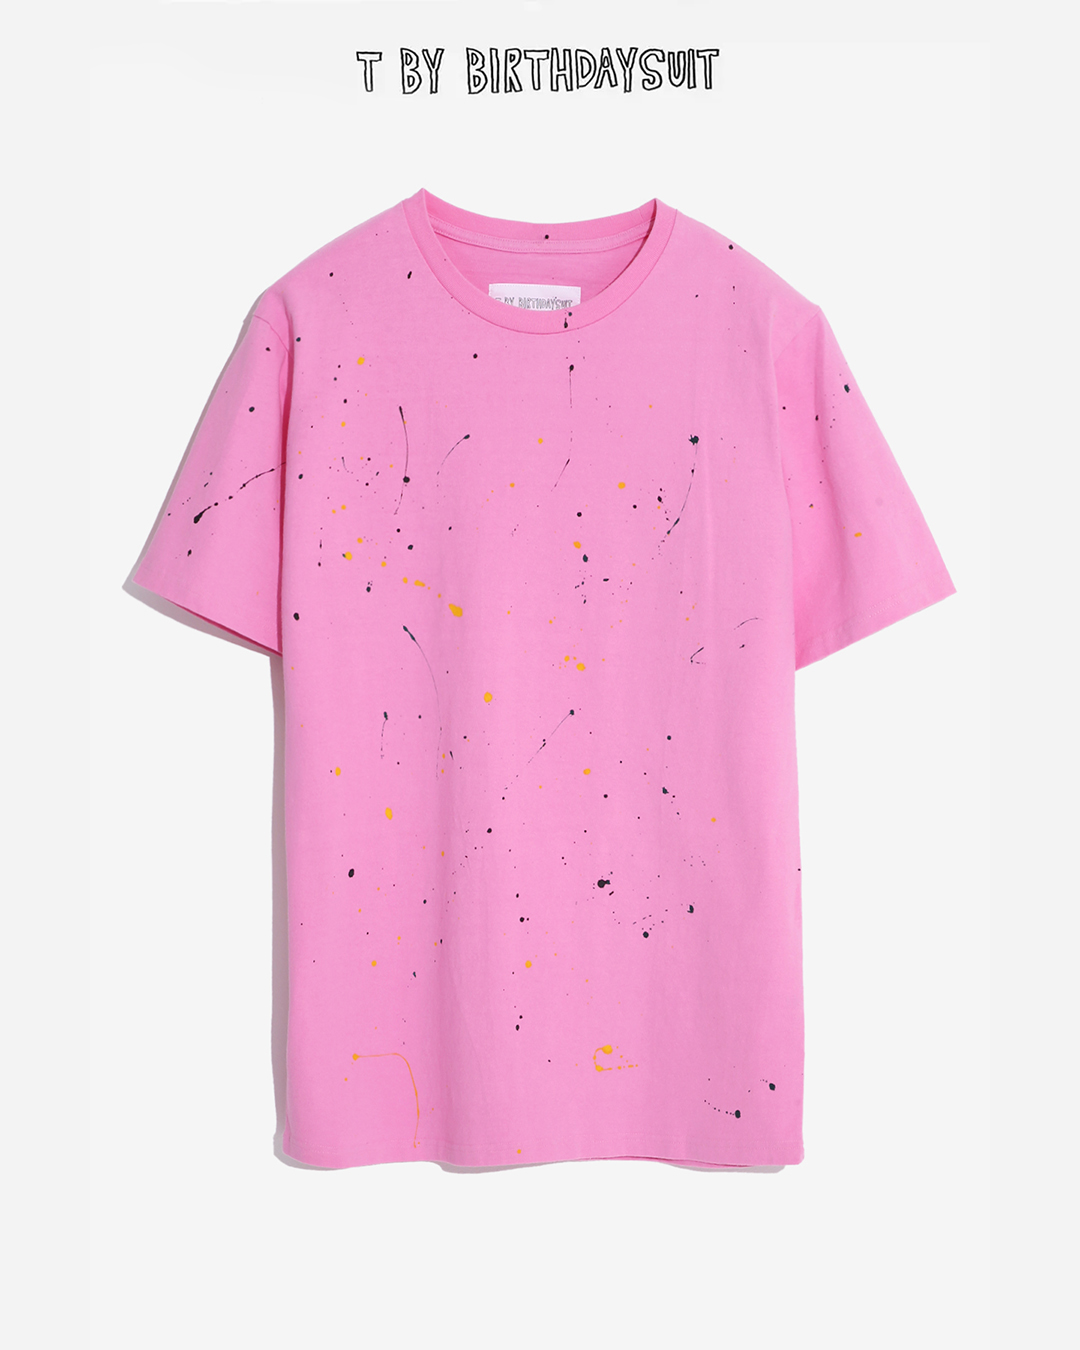 PAINTED T-SHIRT (PINK)